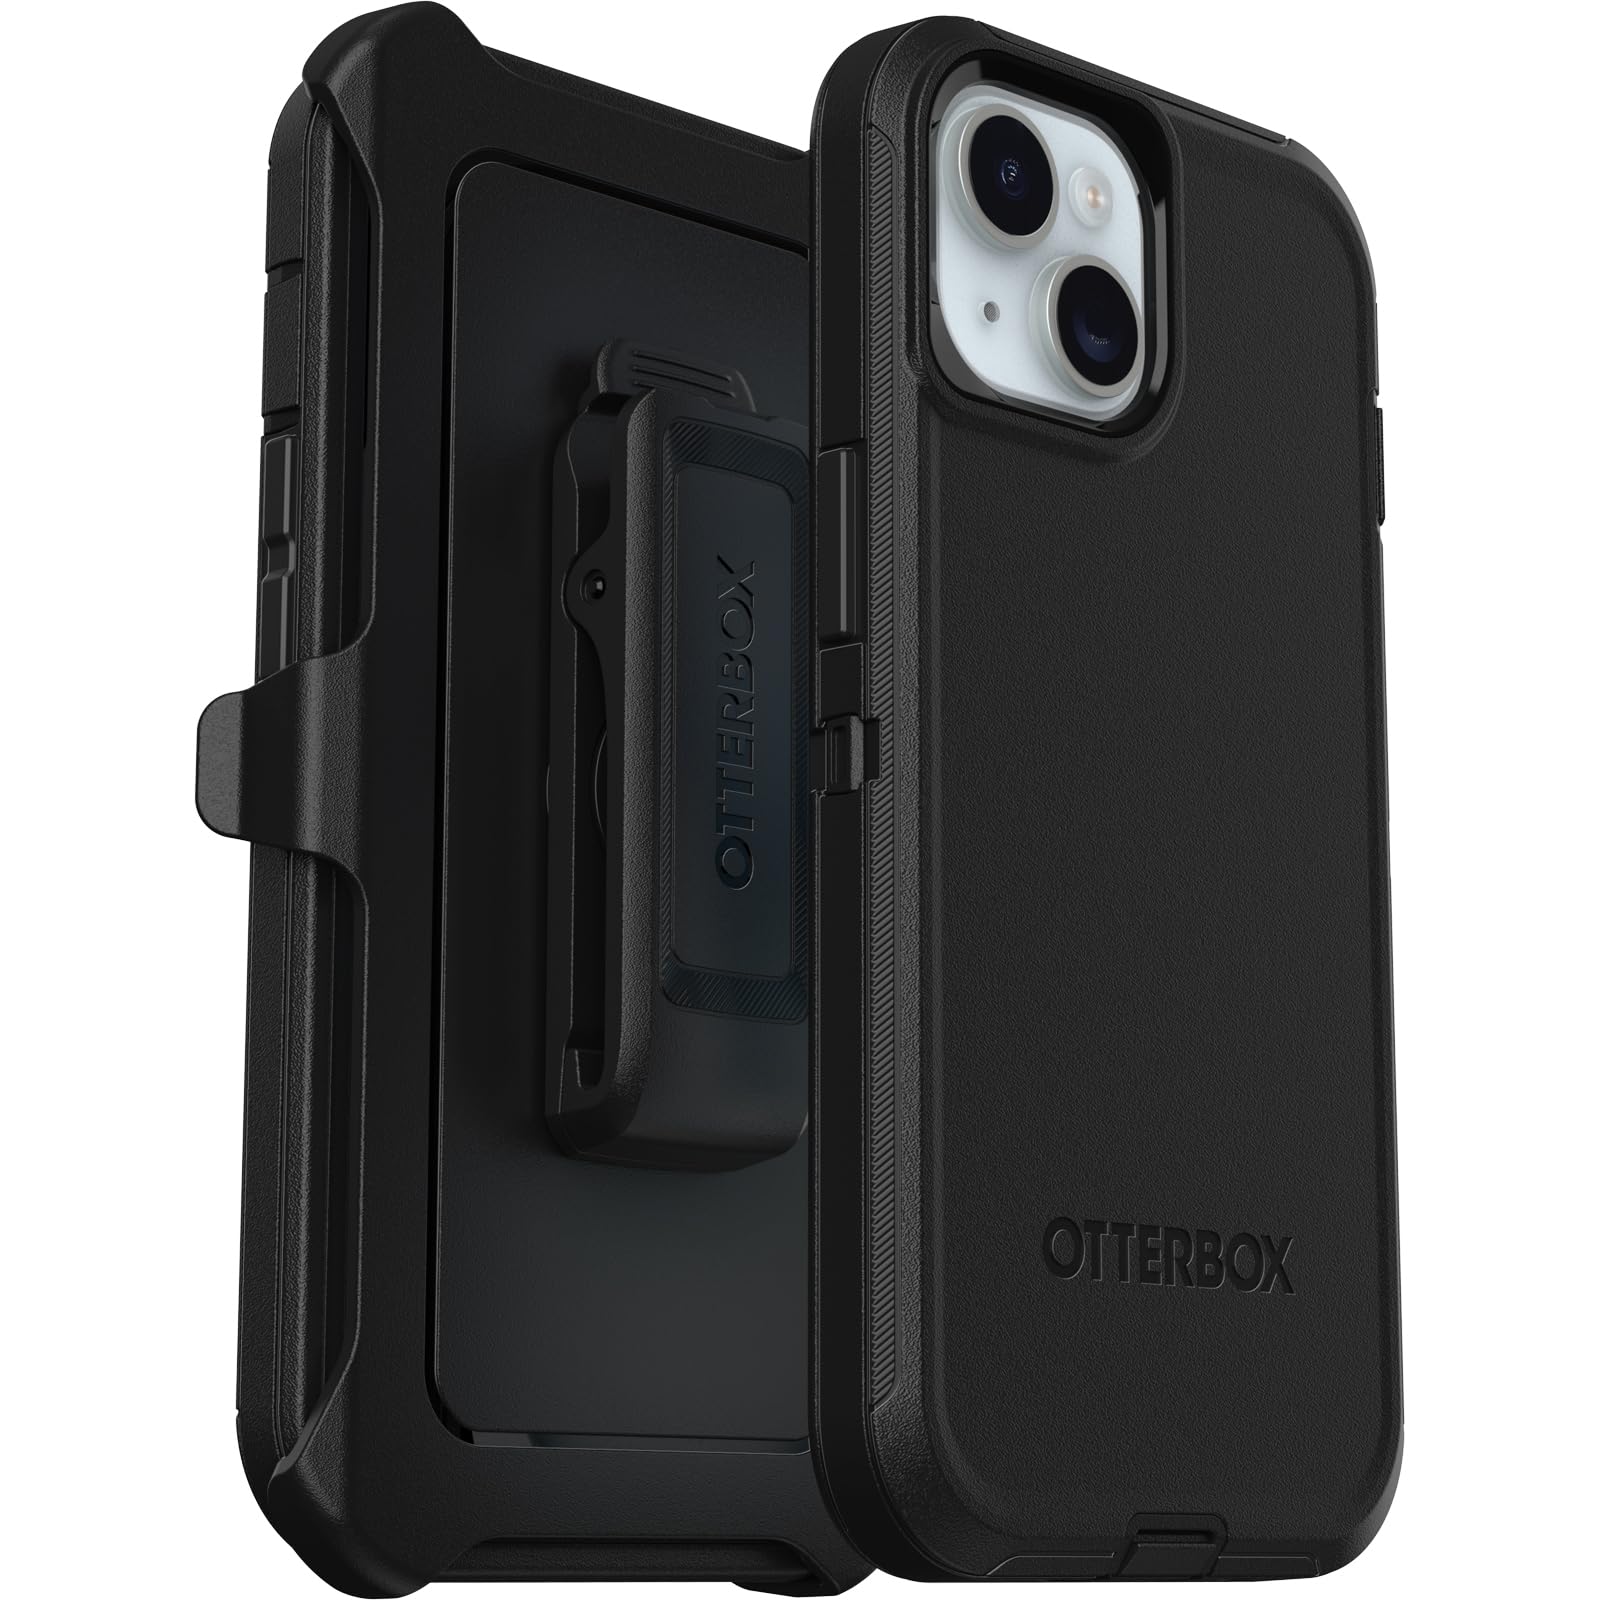 OtterBox iPhone 15, iPhone 14, and iPhone 13 Defender Series Case - BLACK, Screenless, Rugged & Durable, with Port Protection, Includes Holster Clip Kickstand